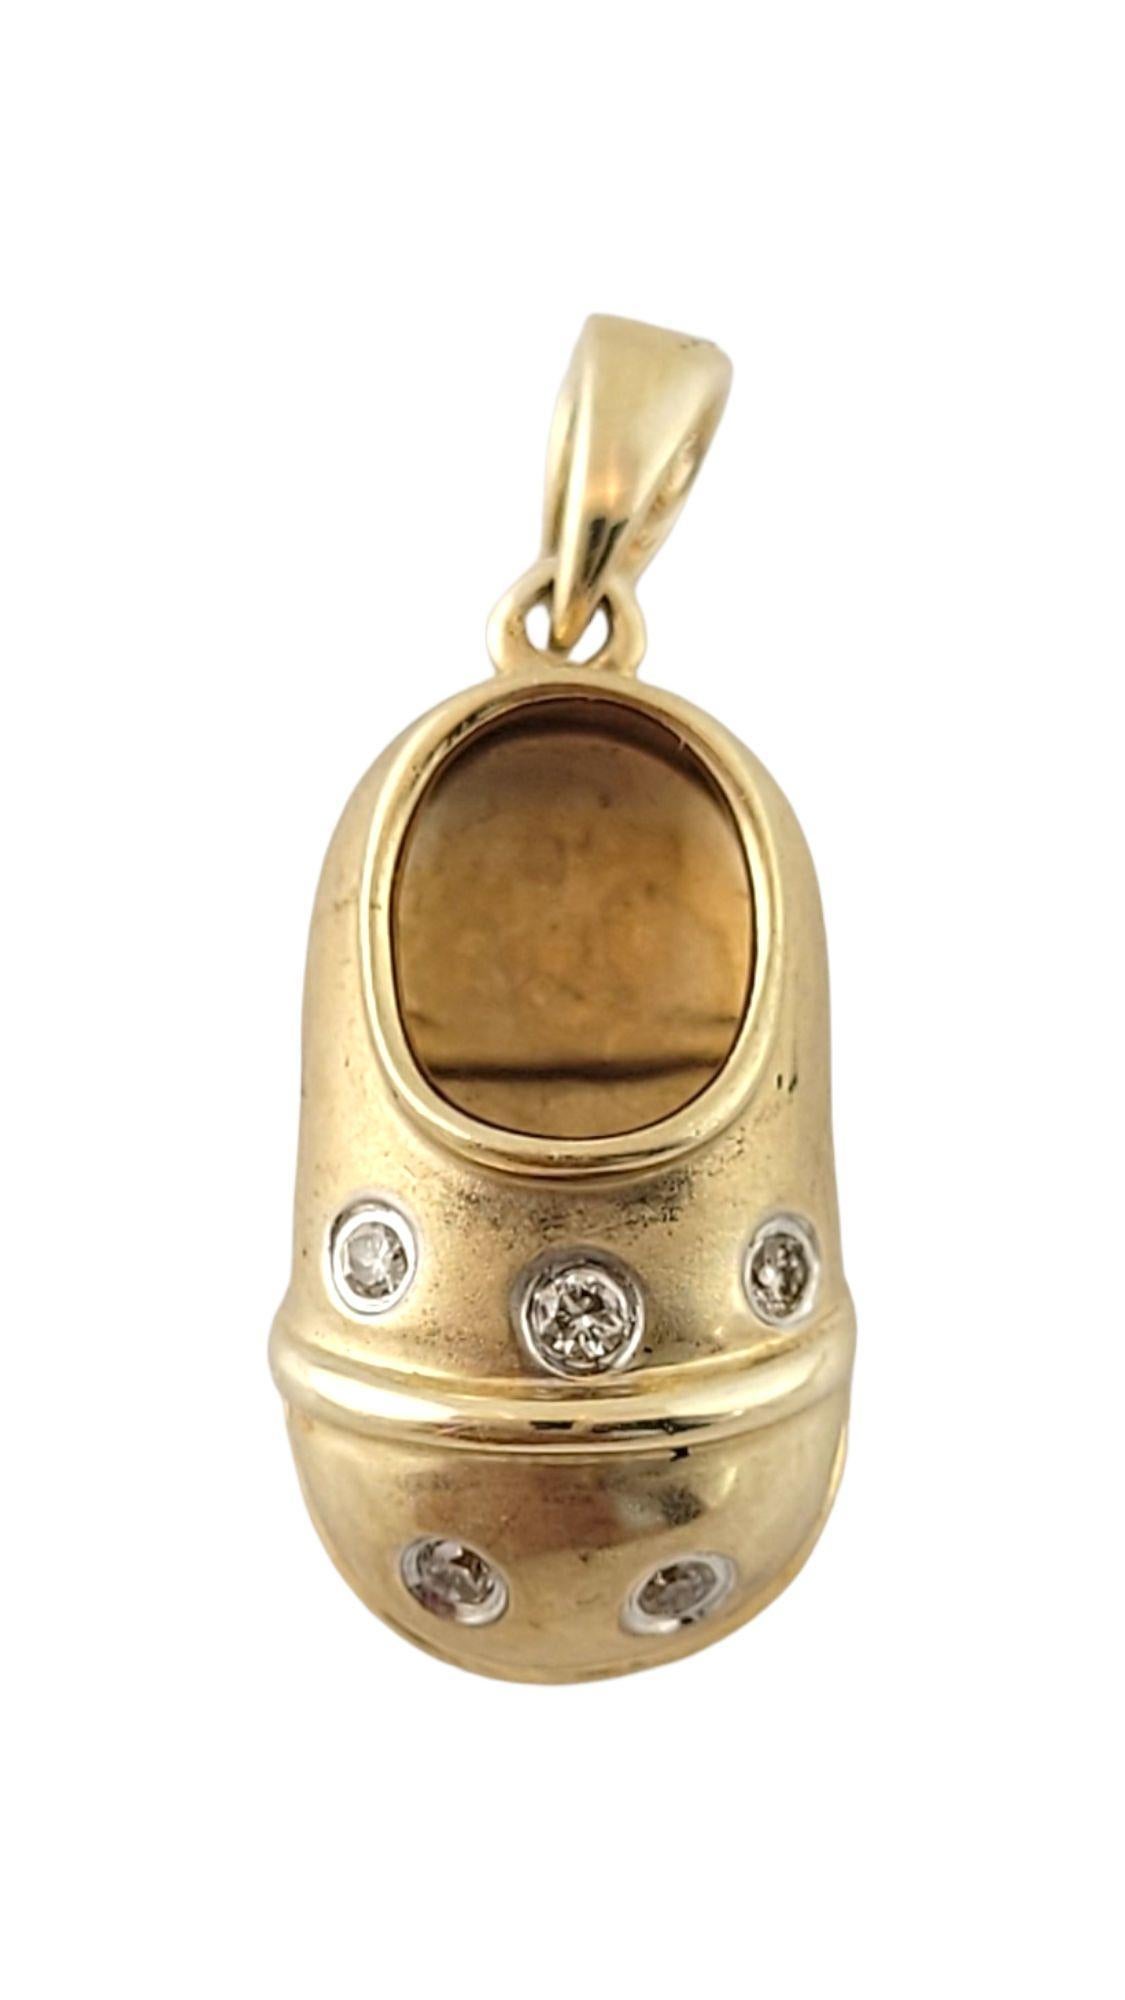 Vintage 14K Yellow Gold Diamond Baby Shoe Charm

This adorable charm features 5 sparkling, round brilliant cut diamonds set in 14K yellow gold!

Approximate total diamond weight: .10 cts

Diamond clarity: I1

Diamond color: H

Size: 17.9mm X 9mm X